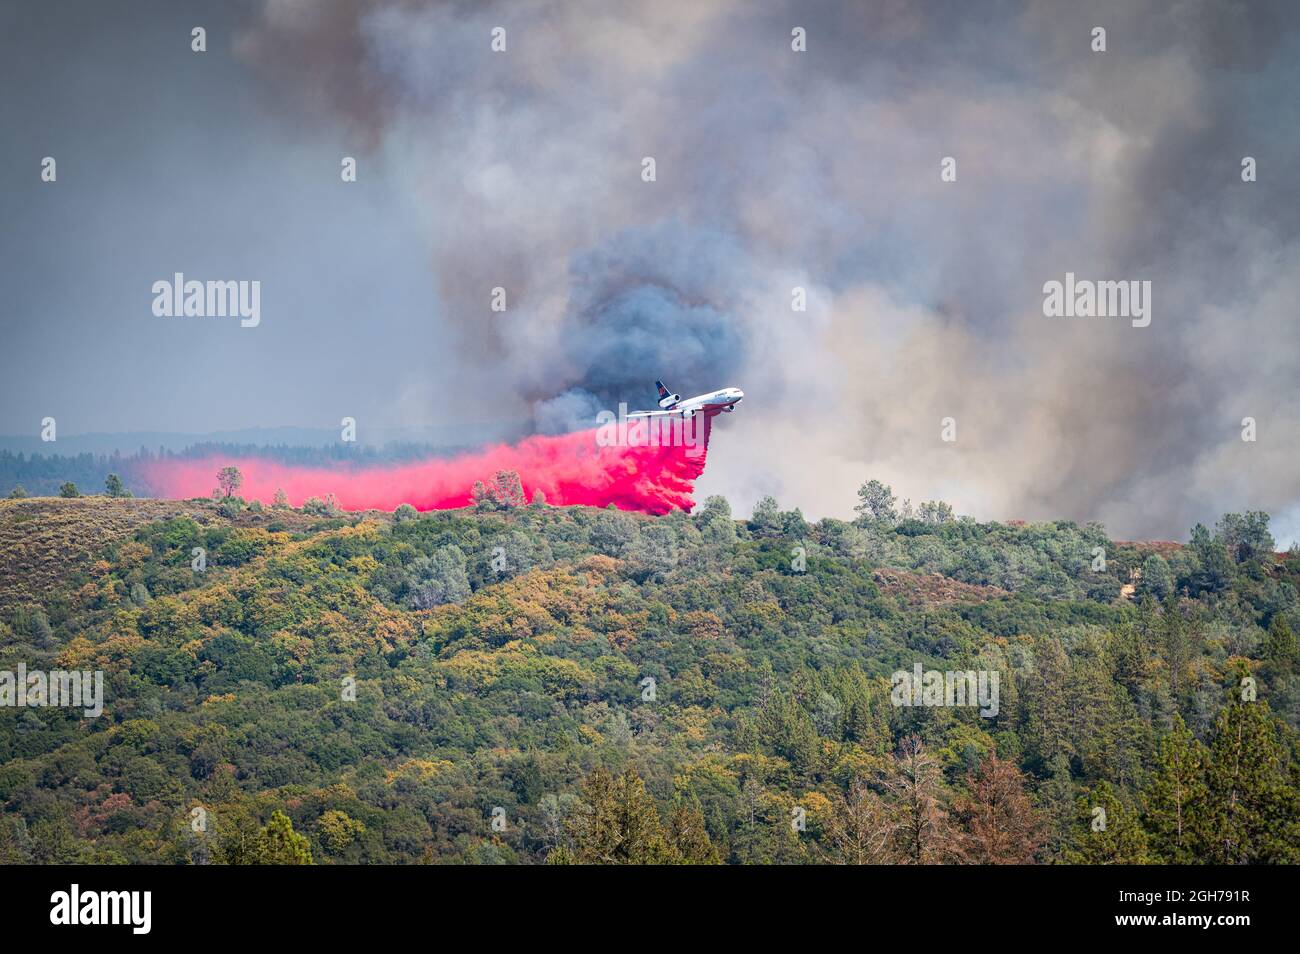 A Cal Fire plane drops bright red fire retardant on the Foresthill Bridge fire, near Auburn, California, in the Sierra Nevada foothills. Stock Photo